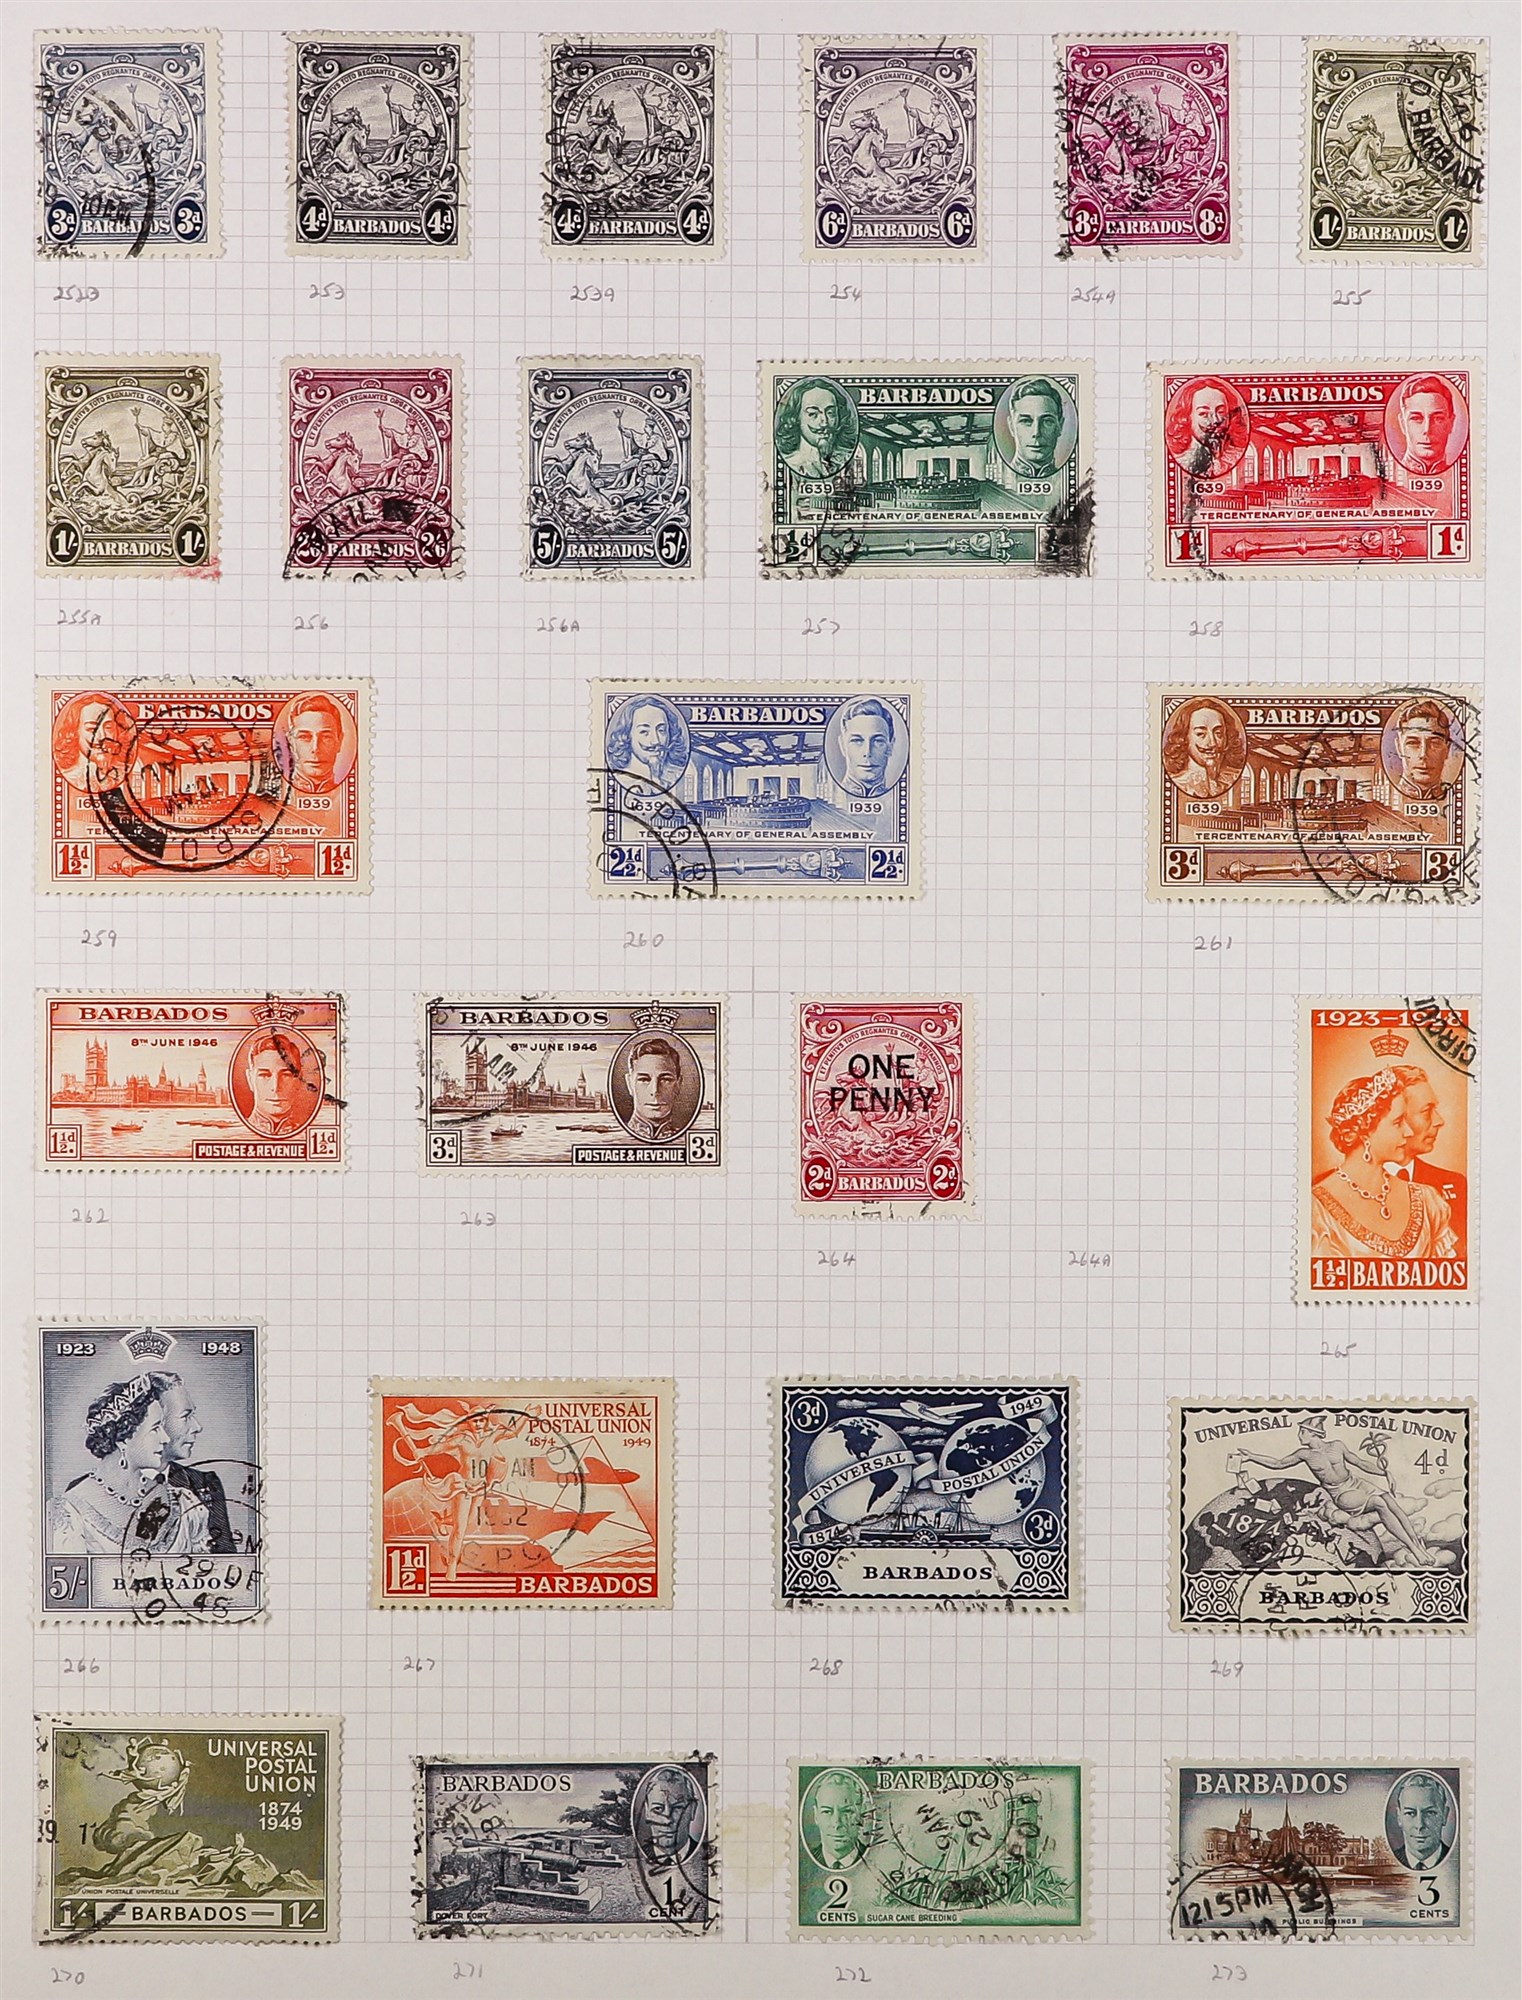 BARBADOS 1852 - 1980 USED COLLECTION of around 500 stamps & miniature sheets in album, comprehensive - Image 5 of 9